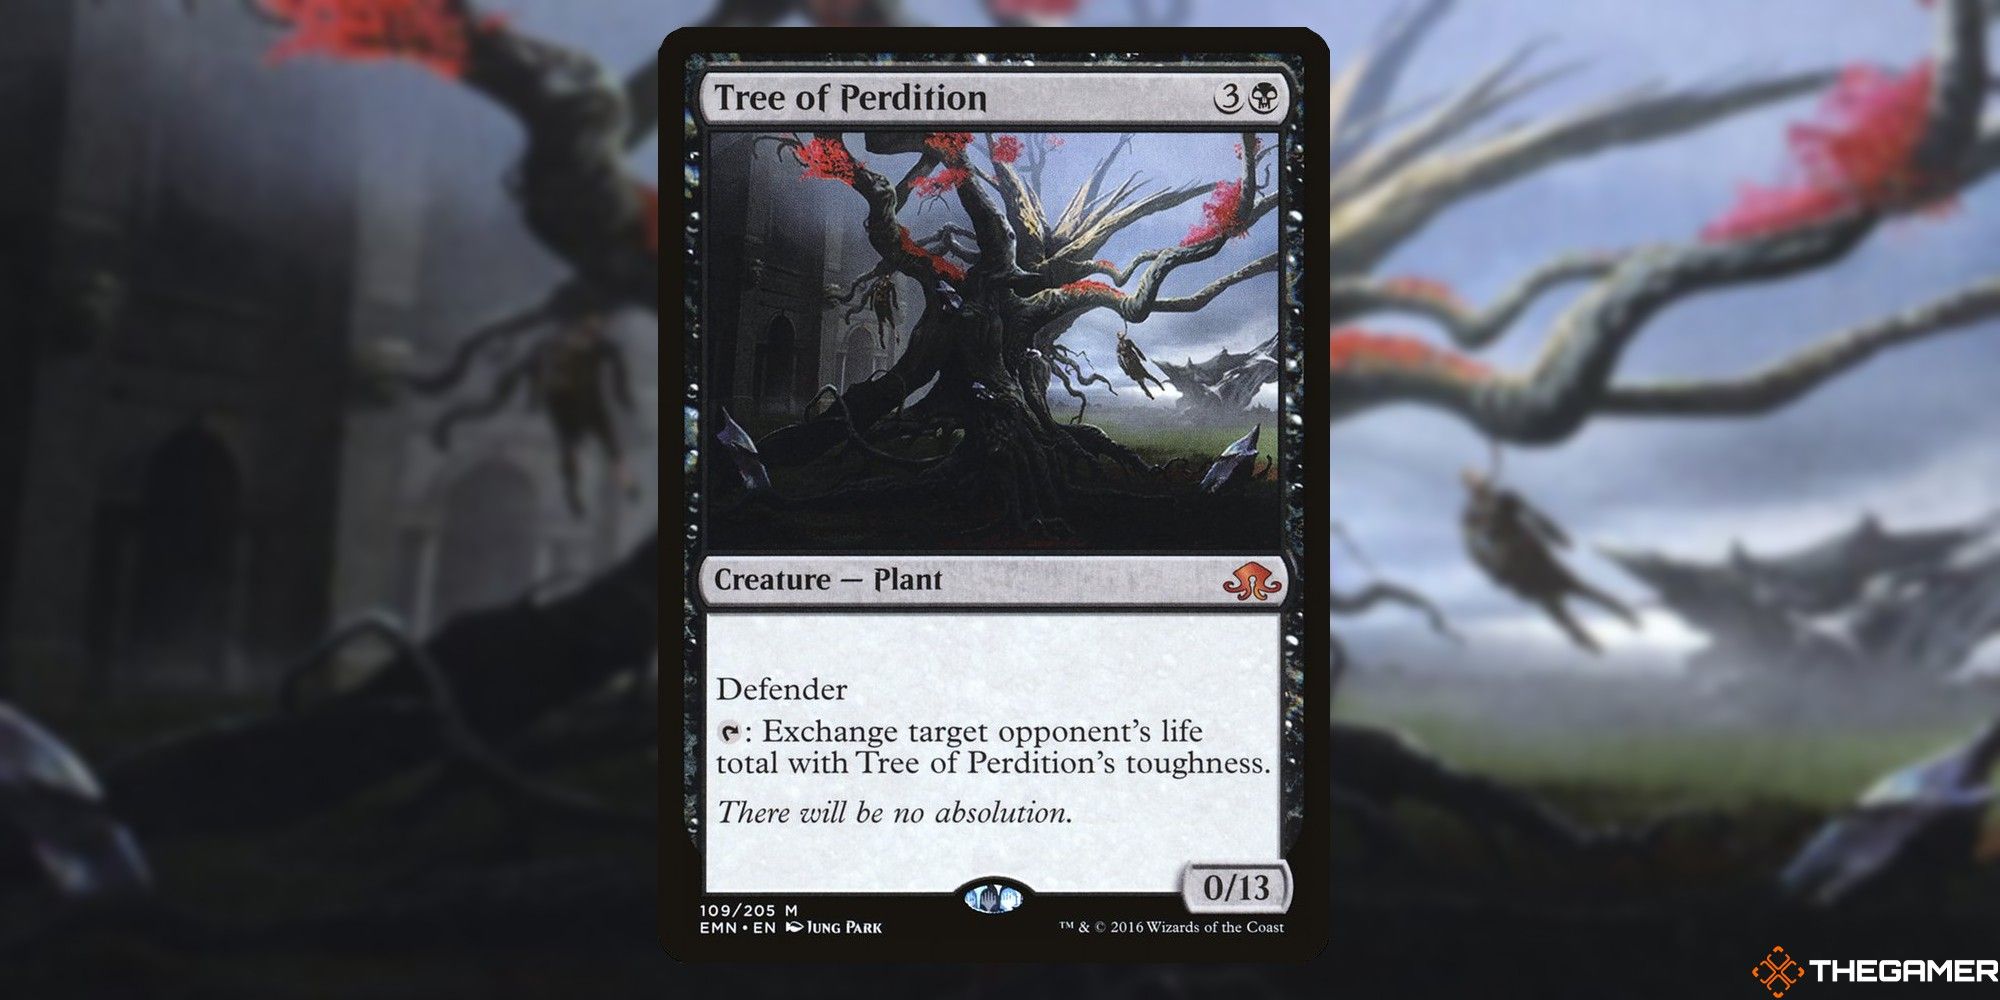 Tree of Perdition card and background art